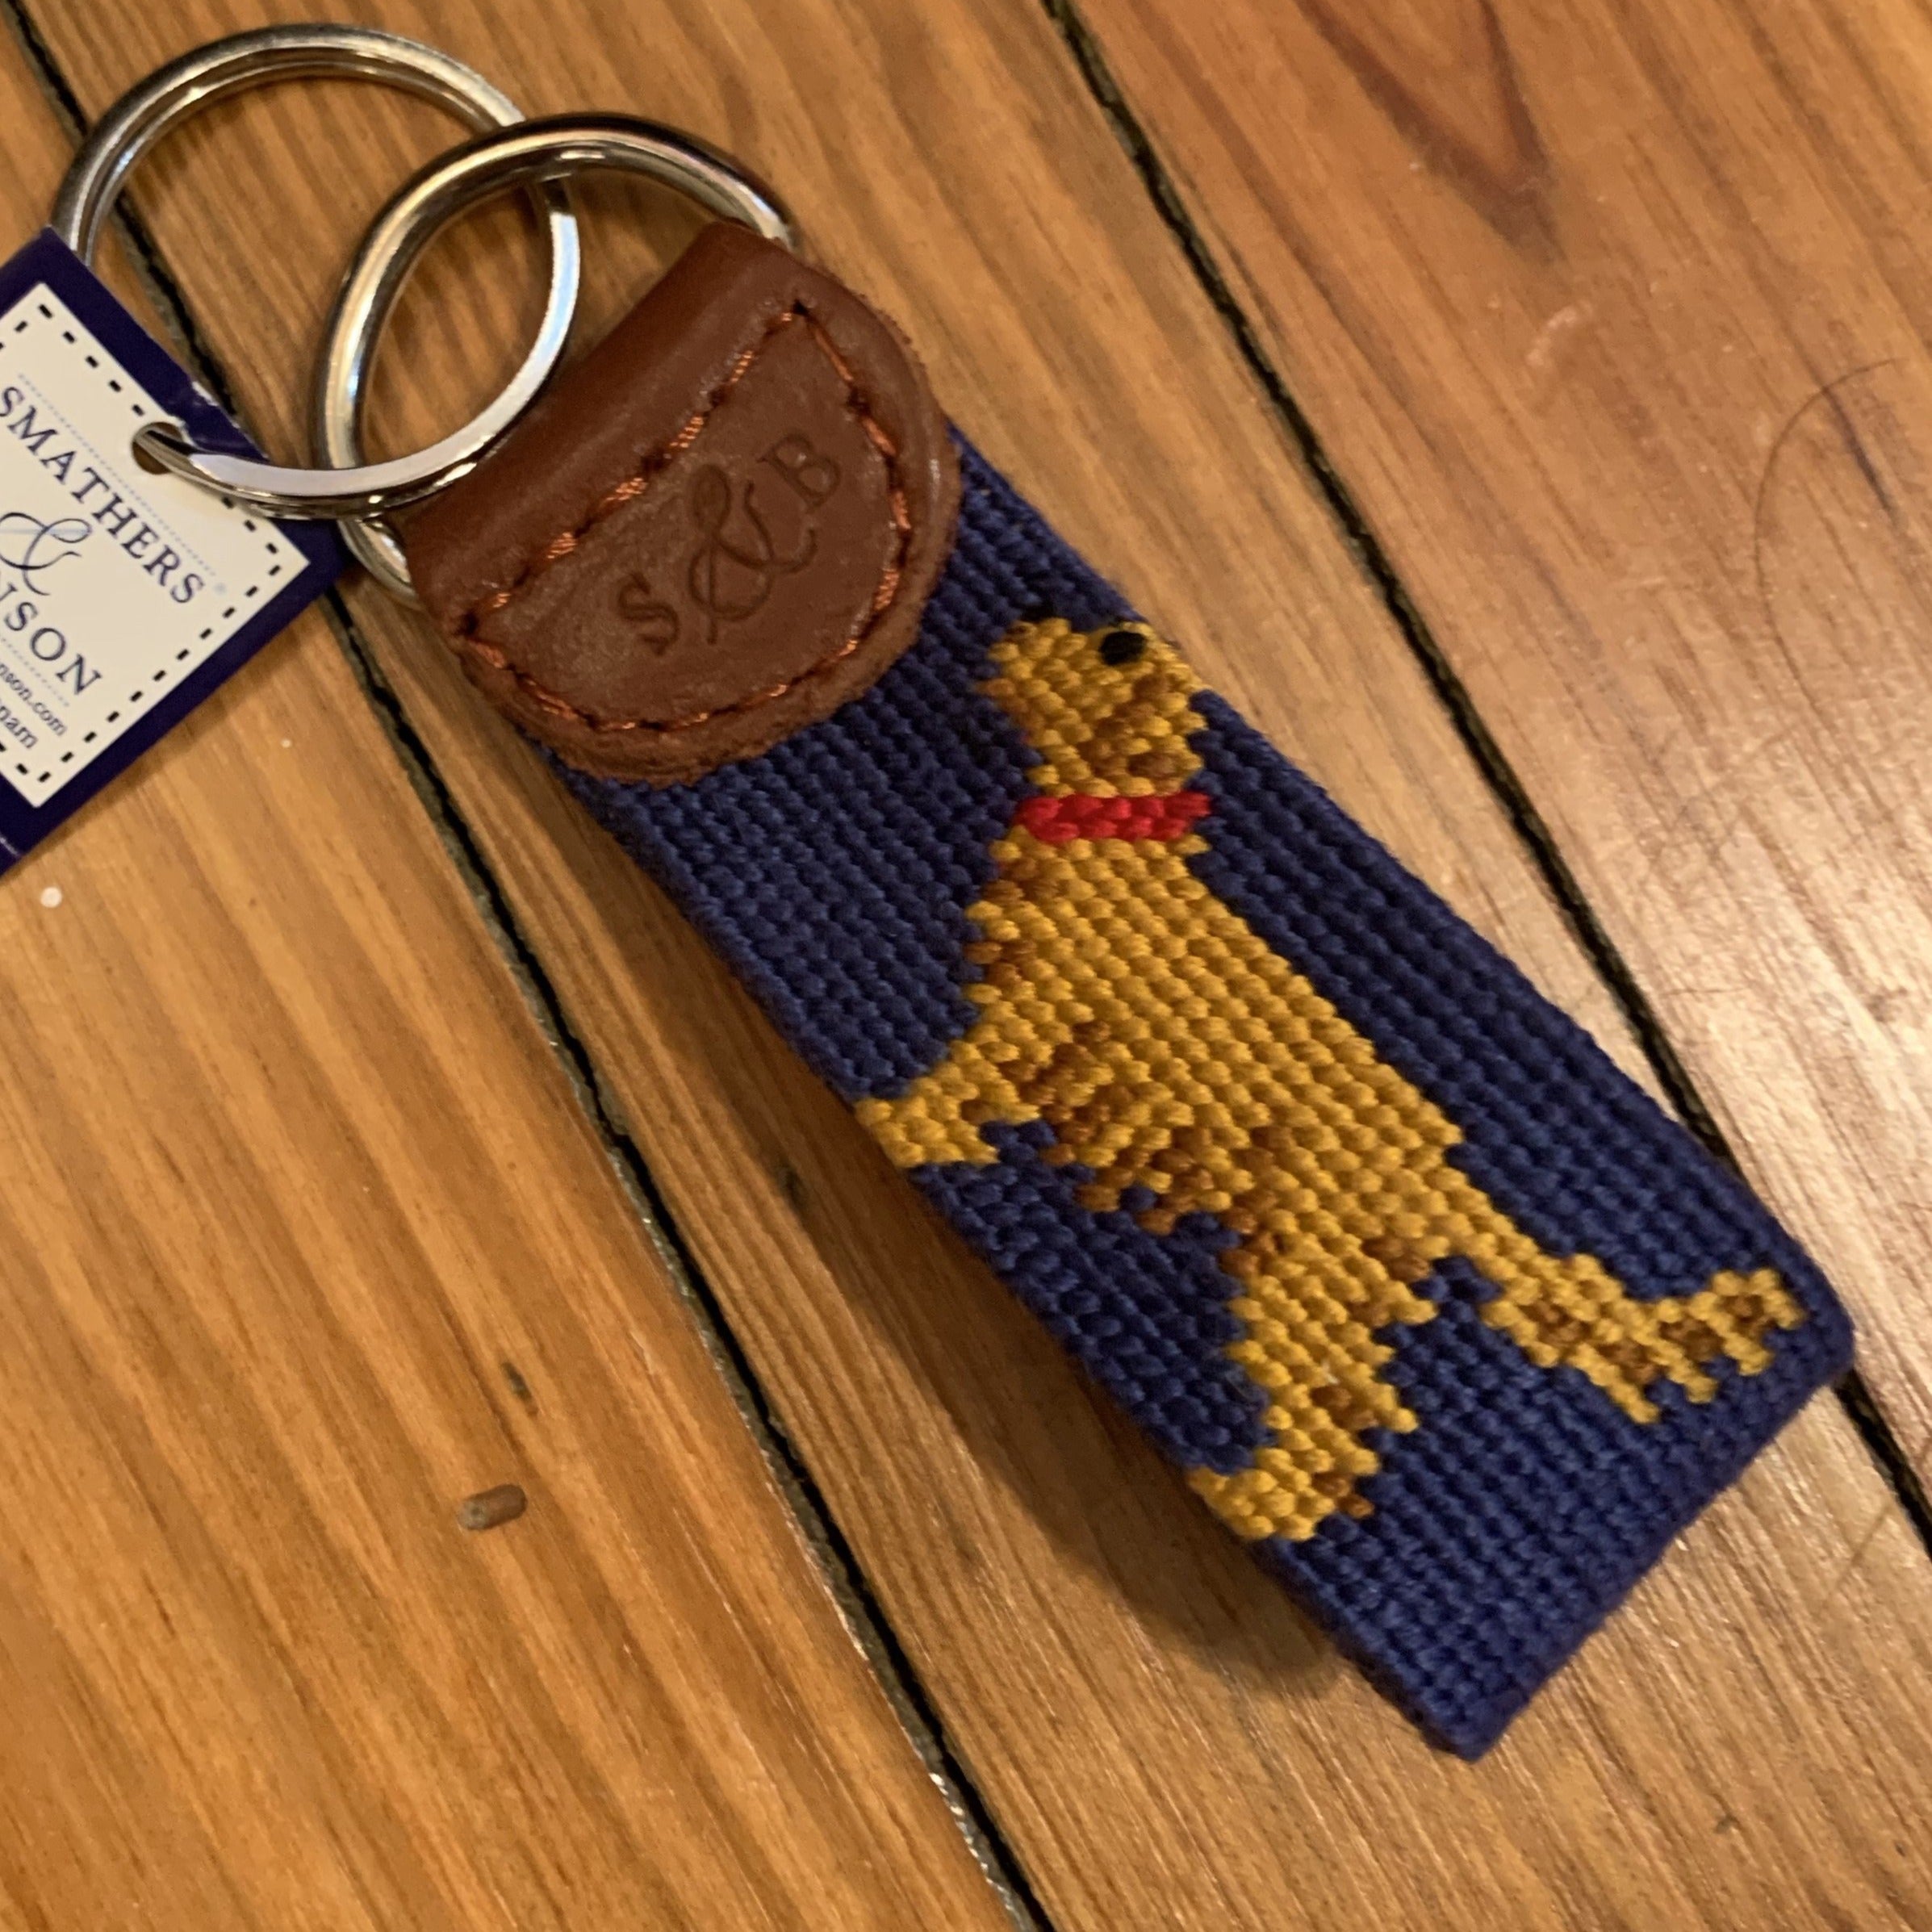 Golden Retriever dog Smathers and Branson key chain